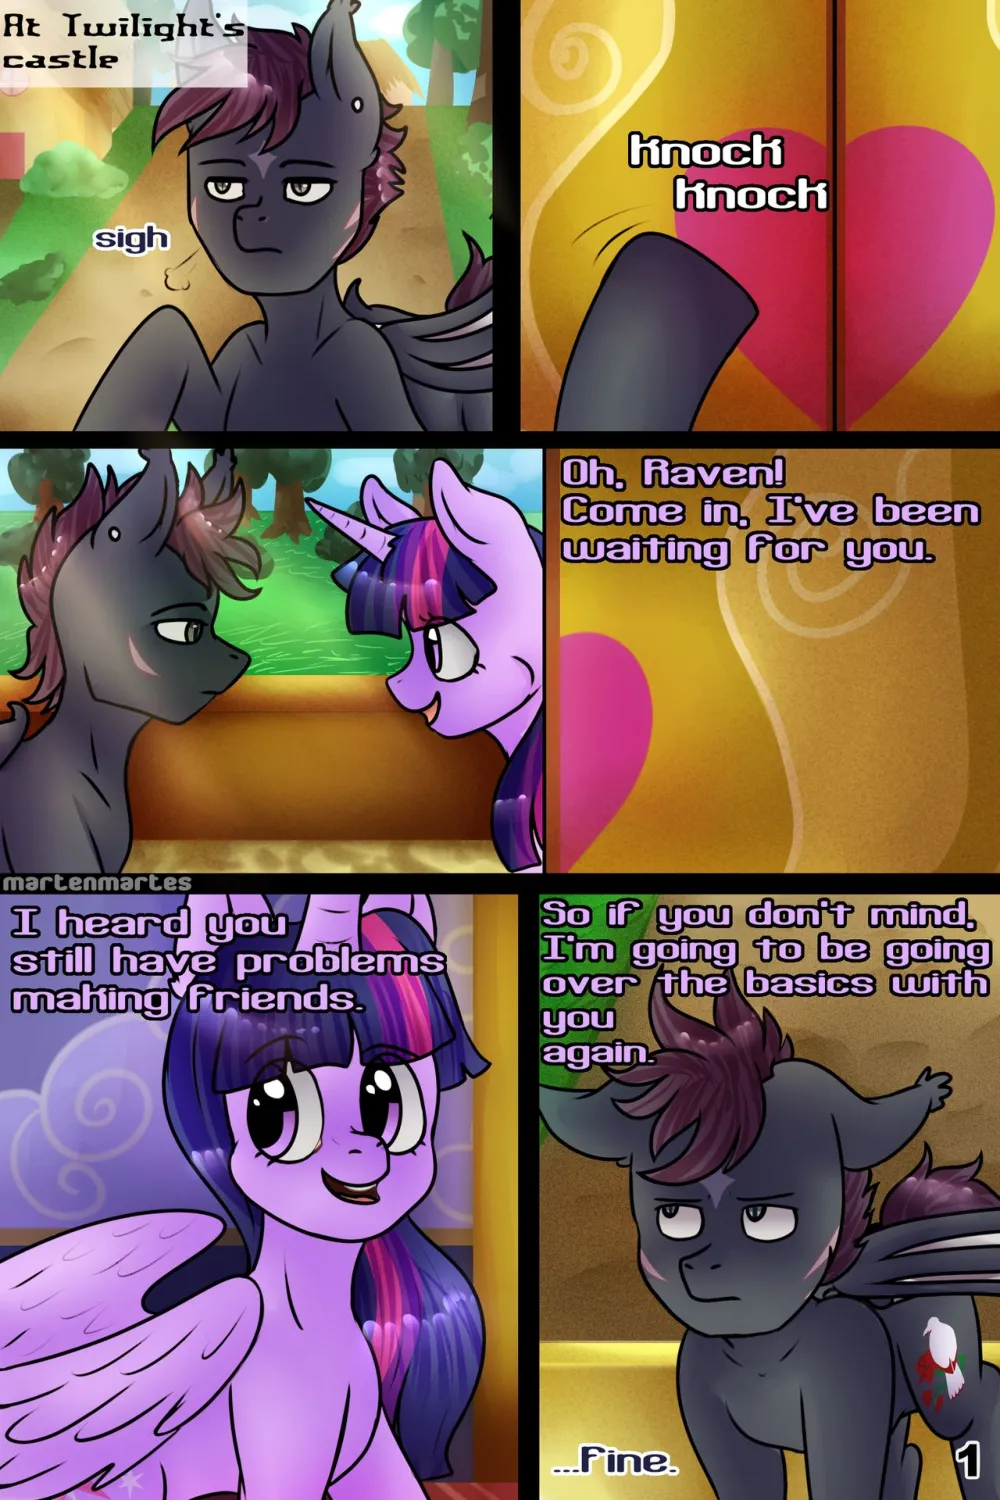 friendship lesson went sexual - Page 2